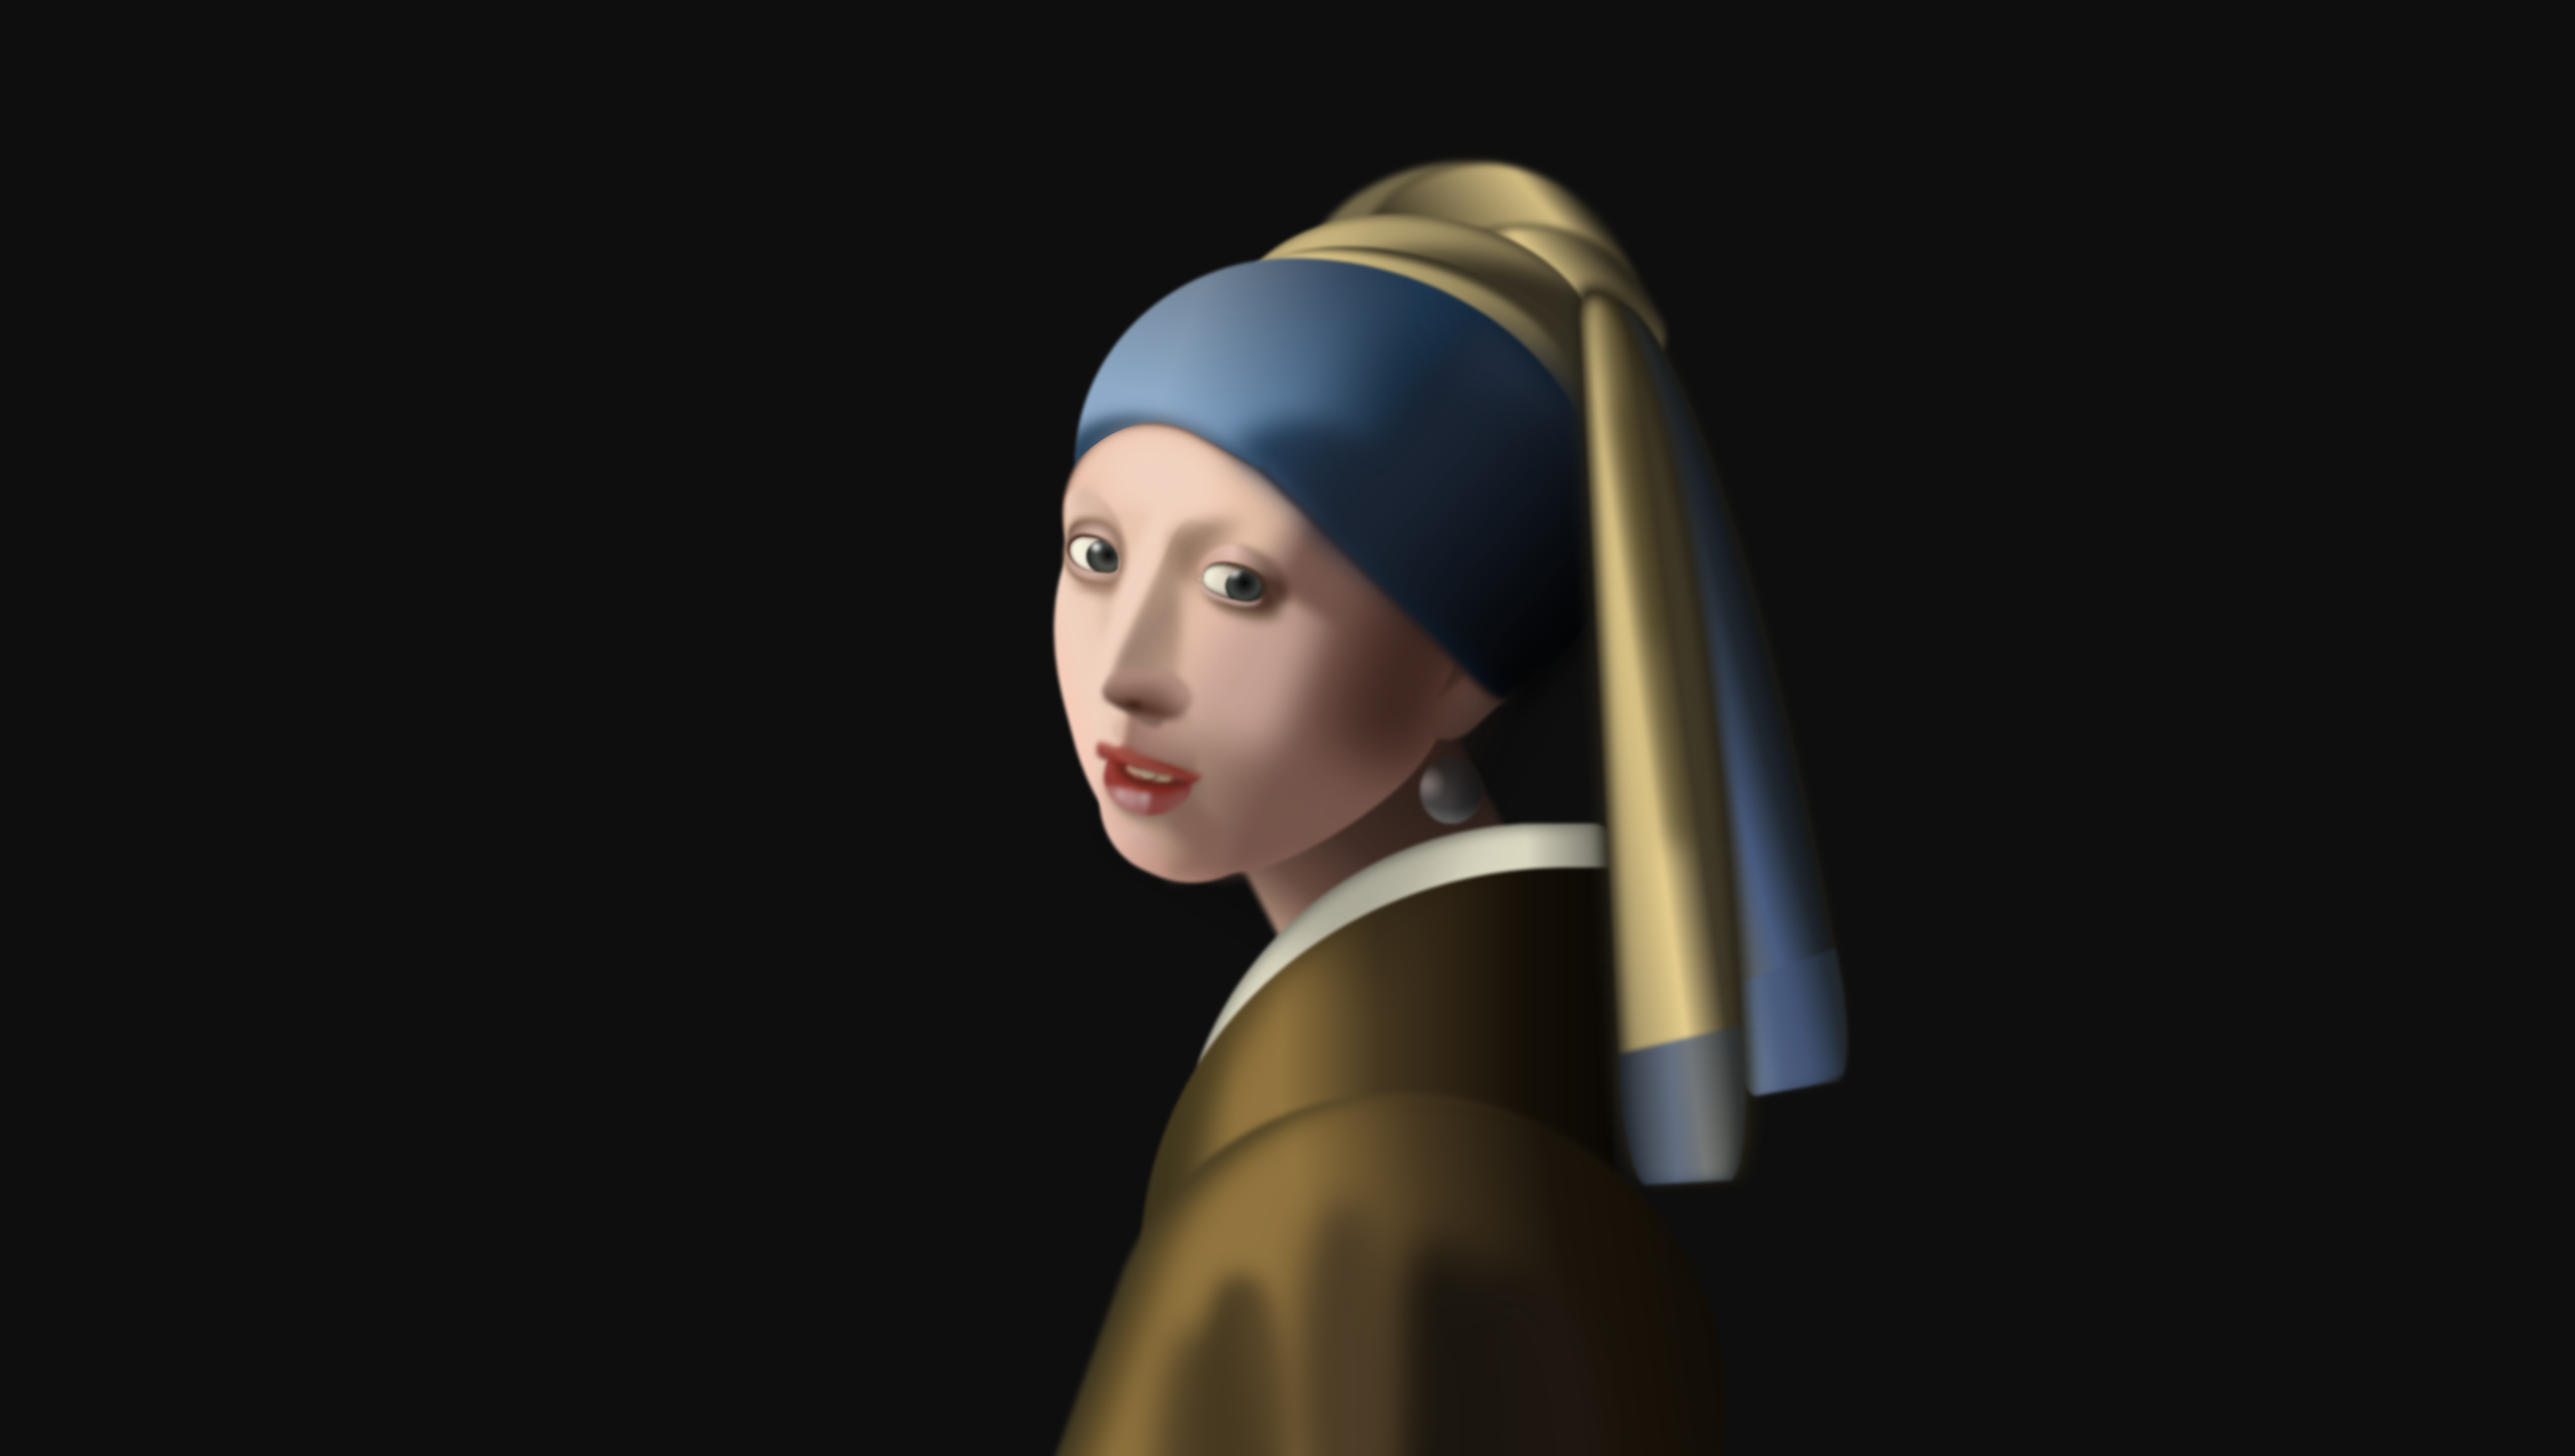 recreation of The Girl With A Pearl Earring in CSS